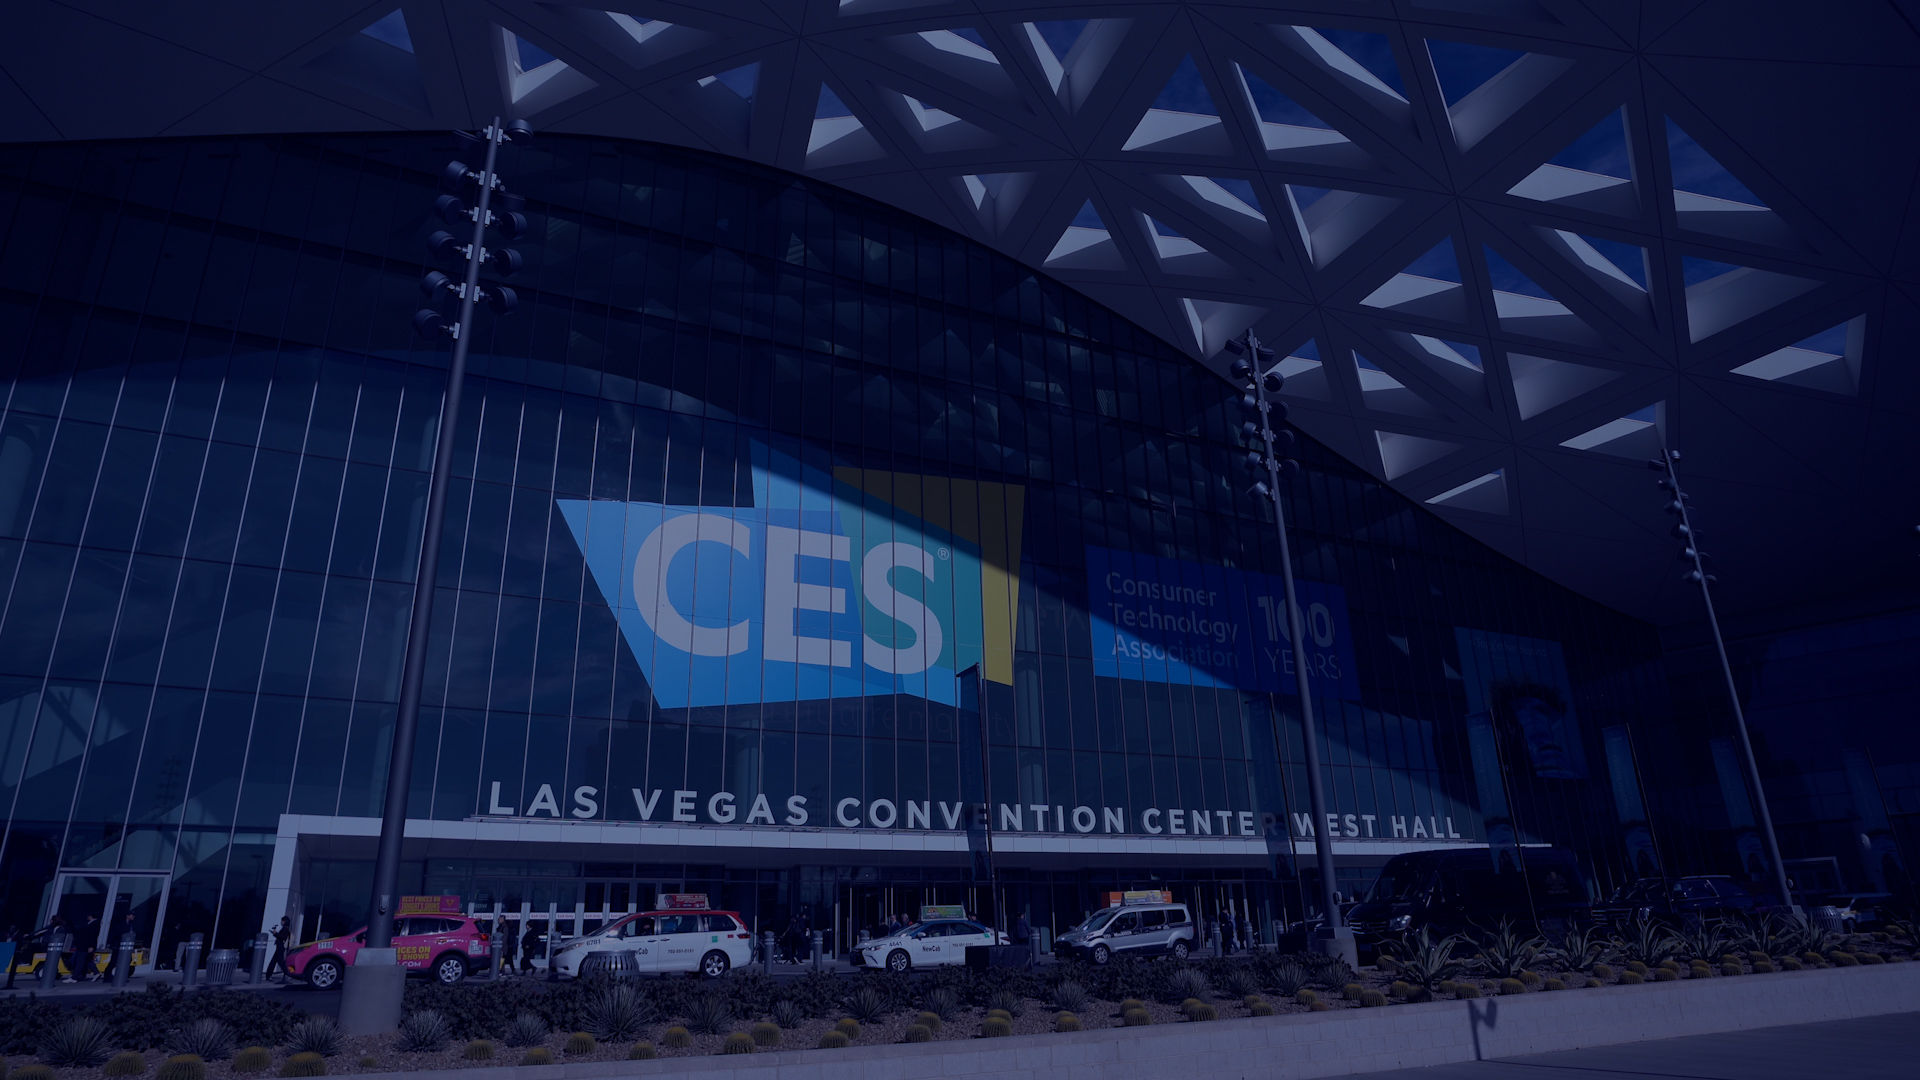 BlackBerry at CES 2023